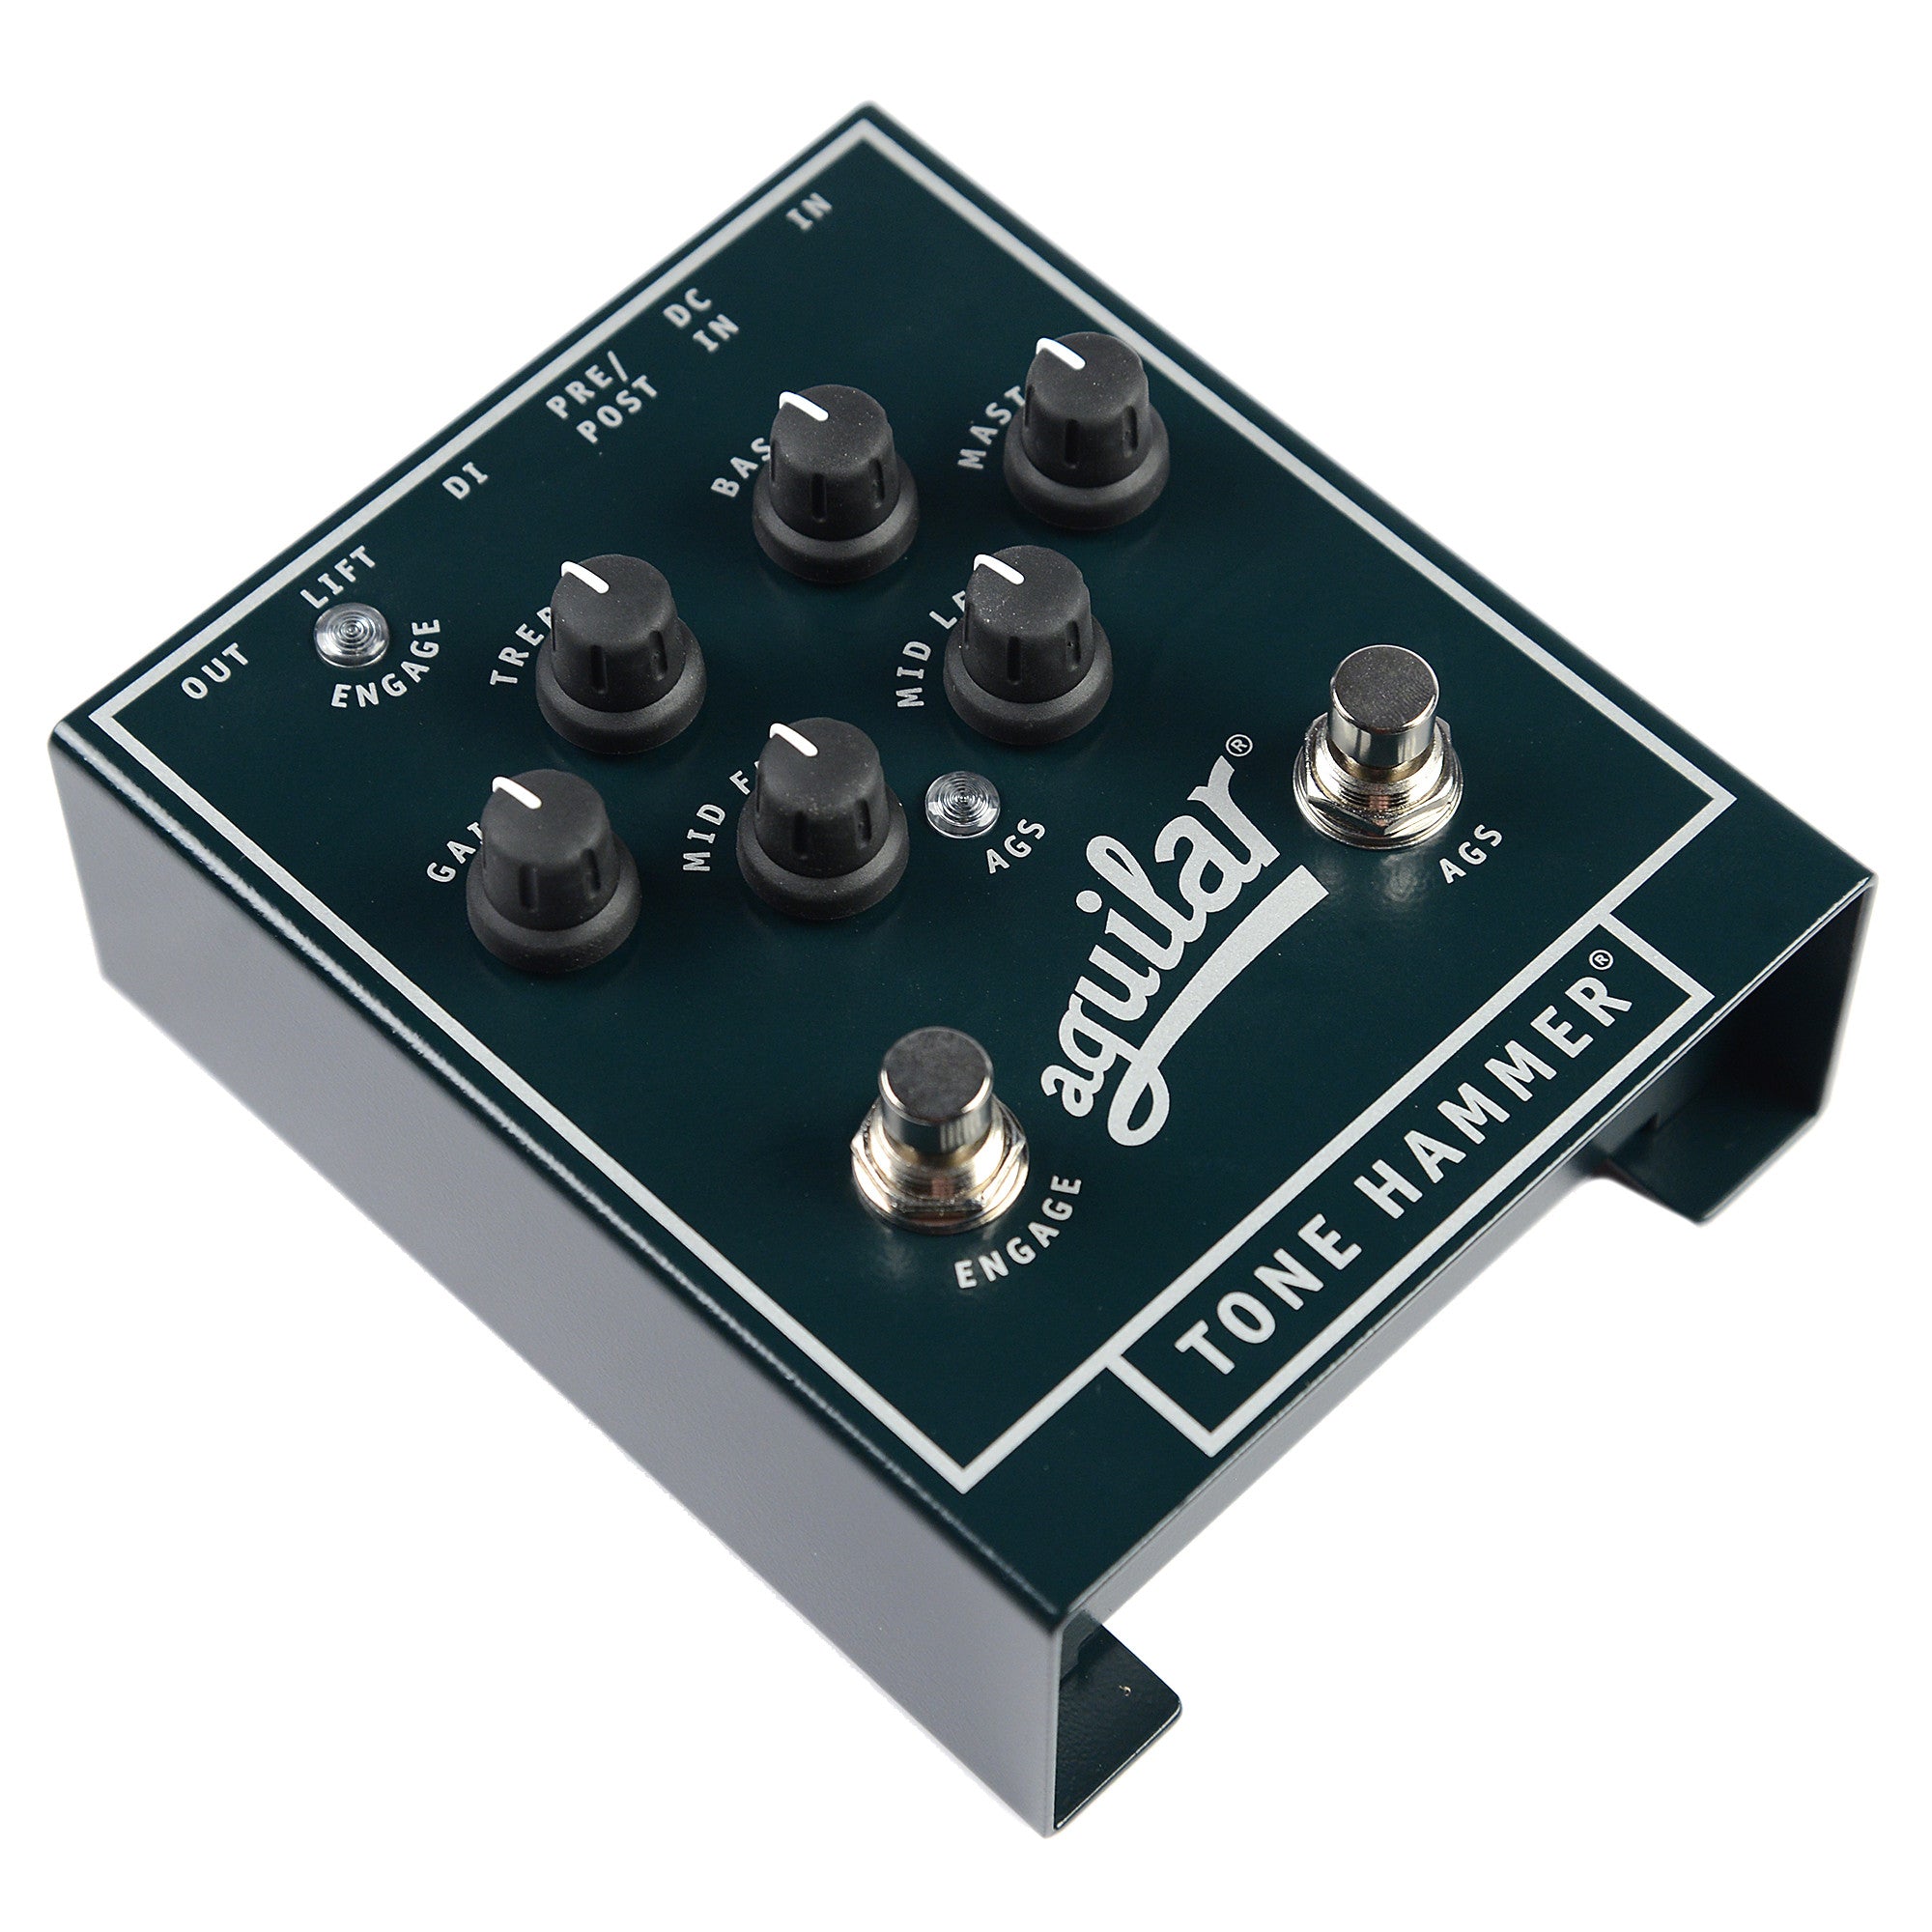 Aguilar Tone Hammer 3-Band Preamp/DI | Chicago Music Exchange